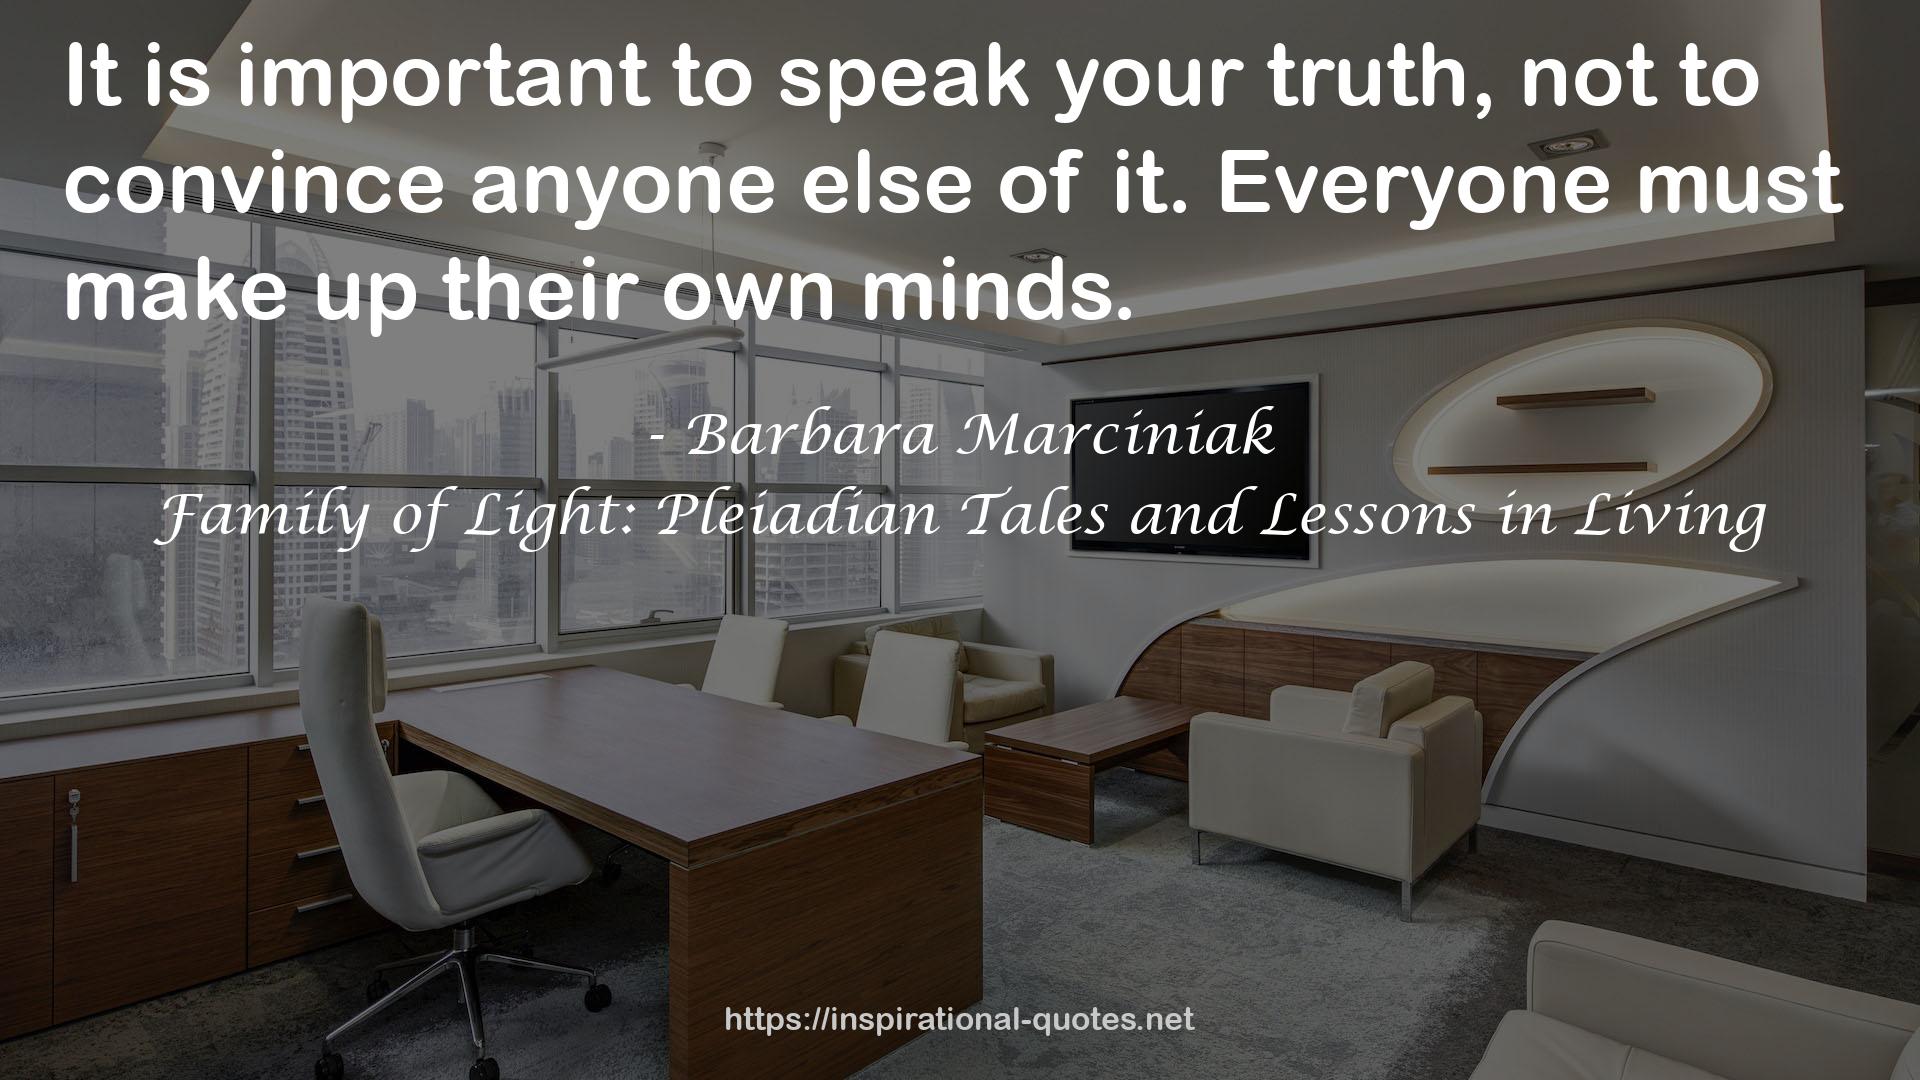 Family of Light: Pleiadian Tales and Lessons in Living QUOTES